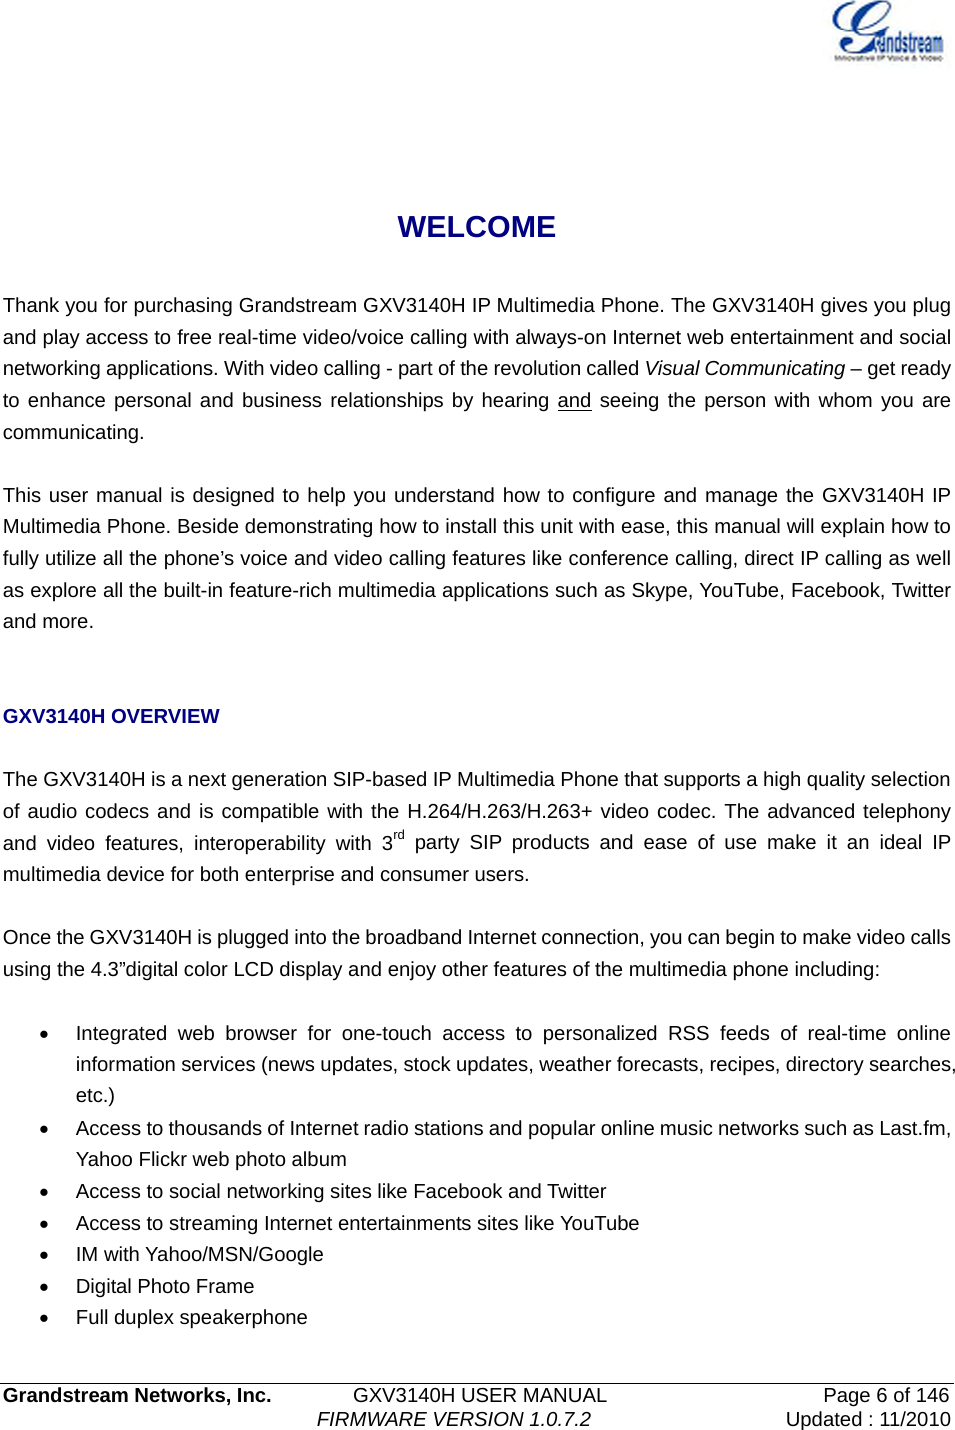   Grandstream Networks, Inc.        GXV3140H USER MANUAL                    Page 6 of 146                                FIRMWARE VERSION 1.0.7.2 Updated : 11/2010    WELCOME  Thank you for purchasing Grandstream GXV3140H IP Multimedia Phone. The GXV3140H gives you plug and play access to free real-time video/voice calling with always-on Internet web entertainment and social networking applications. With video calling - part of the revolution called Visual Communicating – get ready to enhance personal and business relationships by hearing and seeing the person with whom you are communicating.   This user manual is designed to help you understand how to configure and manage the GXV3140H IP Multimedia Phone. Beside demonstrating how to install this unit with ease, this manual will explain how to fully utilize all the phone’s voice and video calling features like conference calling, direct IP calling as well as explore all the built-in feature-rich multimedia applications such as Skype, YouTube, Facebook, Twitter and more.   GXV3140H OVERVIEW  The GXV3140H is a next generation SIP-based IP Multimedia Phone that supports a high quality selection of audio codecs and is compatible with the H.264/H.263/H.263+ video codec. The advanced telephony and video features, interoperability with 3rd party SIP products and ease of use make it an ideal IP multimedia device for both enterprise and consumer users.  Once the GXV3140H is plugged into the broadband Internet connection, you can begin to make video calls using the 4.3”digital color LCD display and enjoy other features of the multimedia phone including:    •  Integrated web browser for one-touch access to personalized RSS feeds of real-time online information services (news updates, stock updates, weather forecasts, recipes, directory searches, etc.) •  Access to thousands of Internet radio stations and popular online music networks such as Last.fm, Yahoo Flickr web photo album •  Access to social networking sites like Facebook and Twitter •  Access to streaming Internet entertainments sites like YouTube   • IM with Yahoo/MSN/Google • Digital Photo Frame •  Full duplex speakerphone 